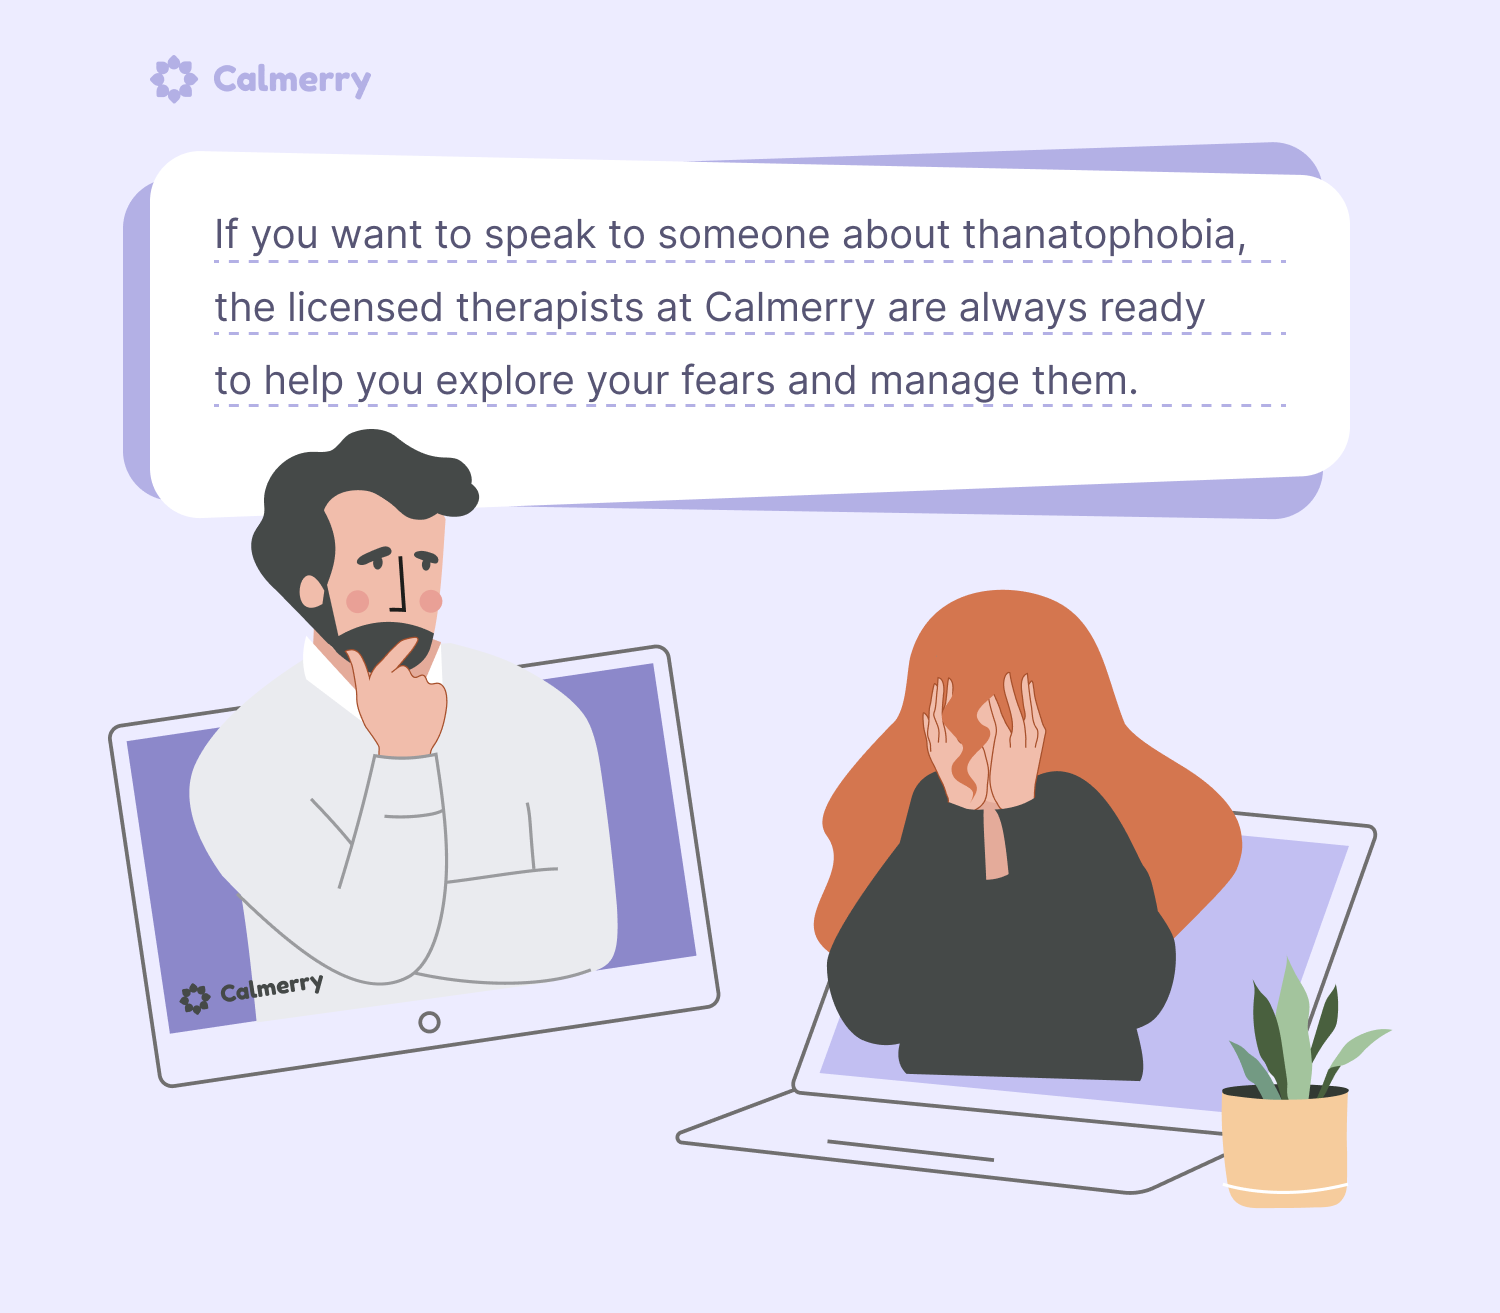 A person speaks to a therapist about thanatophobia